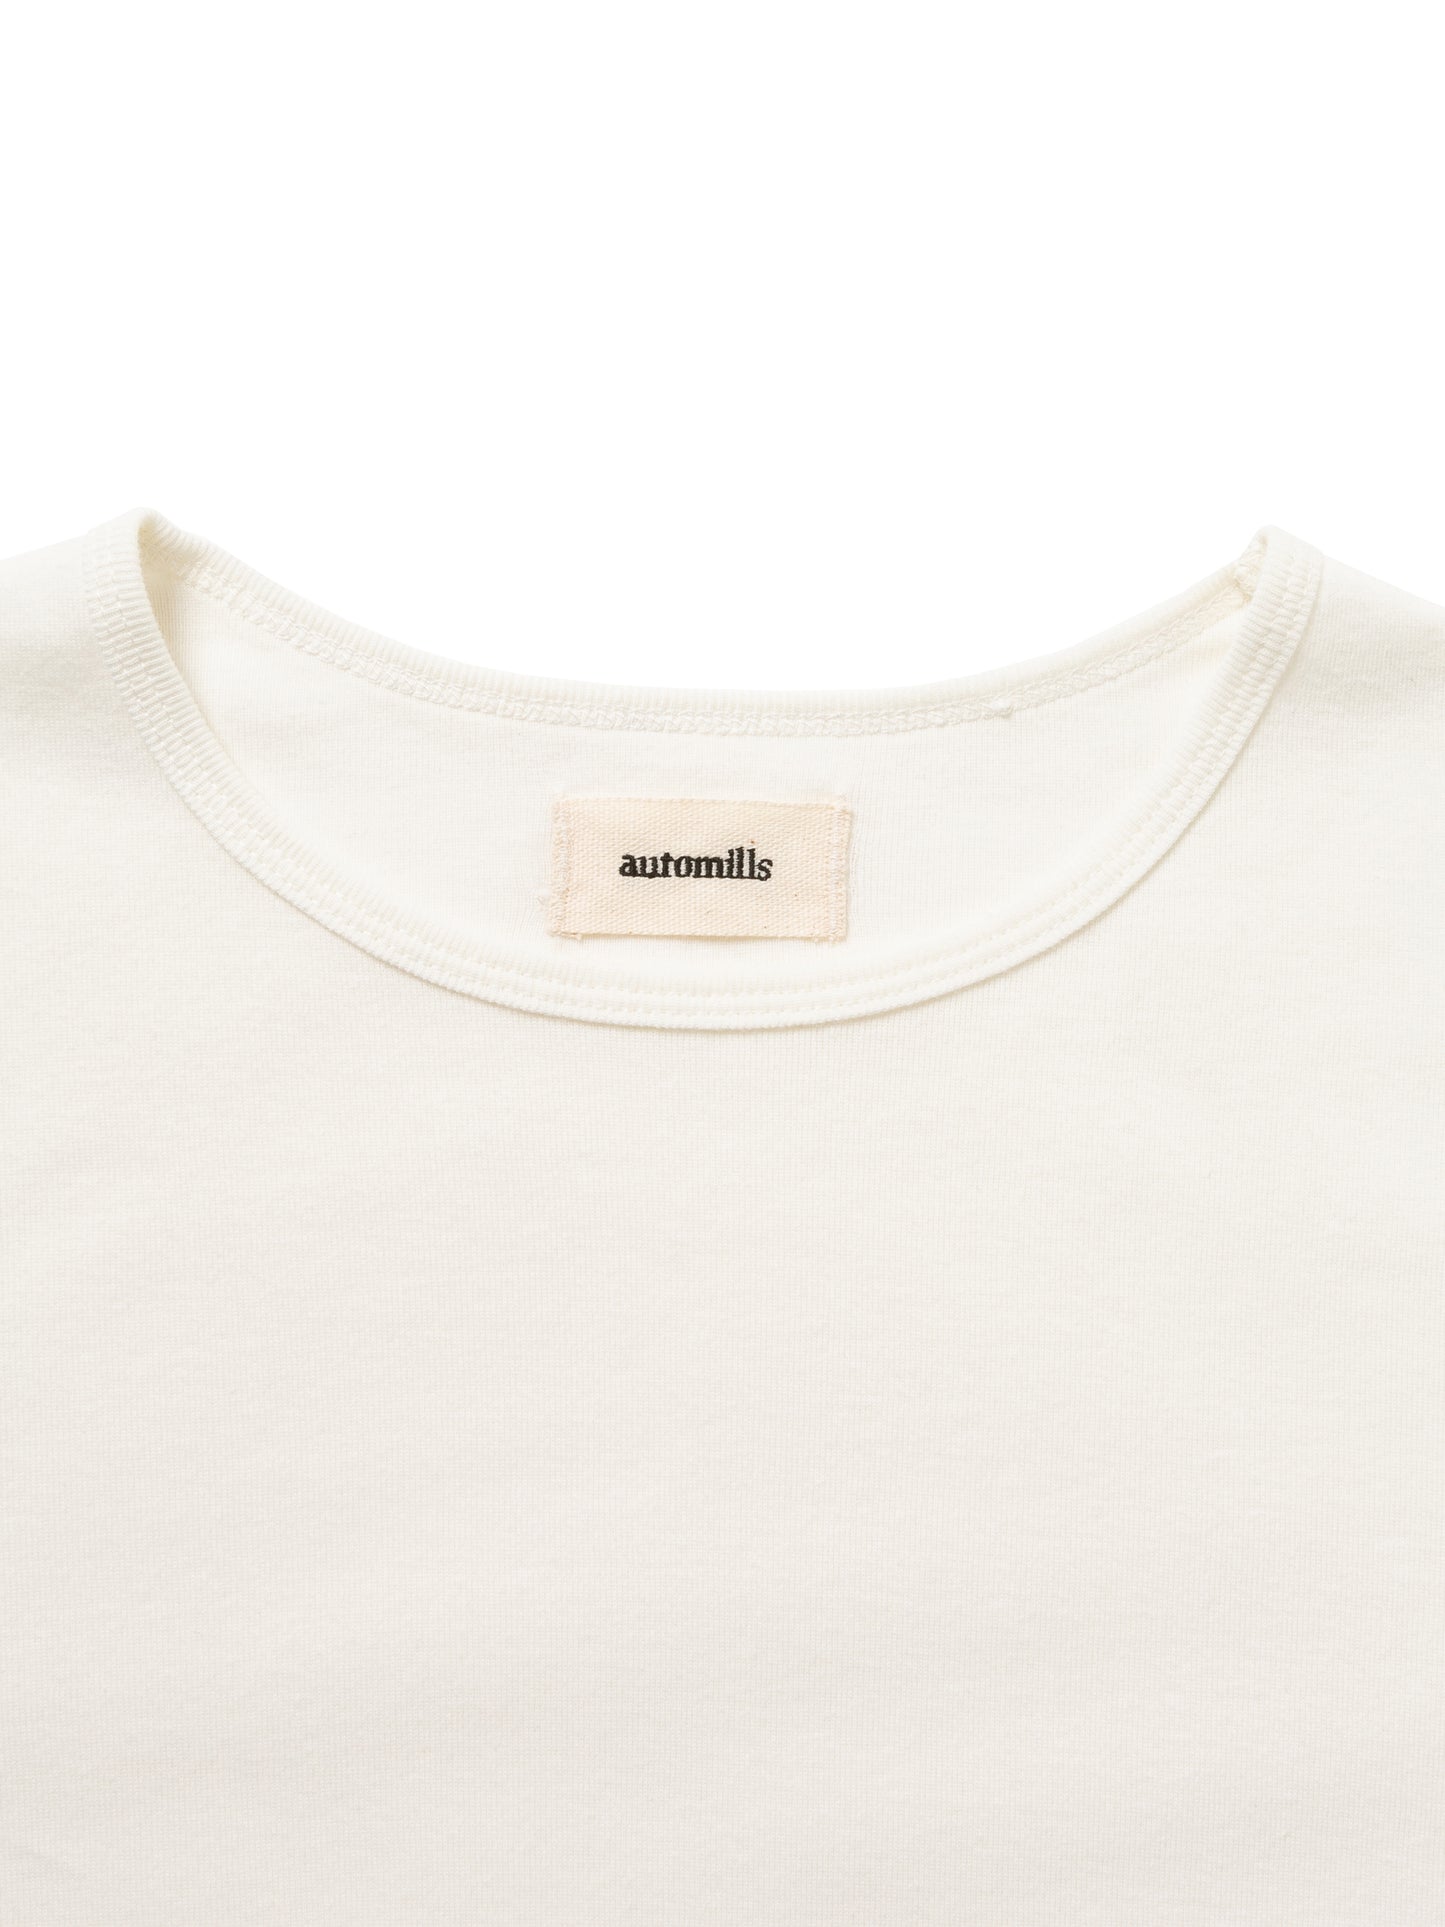 LOVER L/S TEE ORGANIC COTTON STRETCH JERSEY AM-C0010 O.White